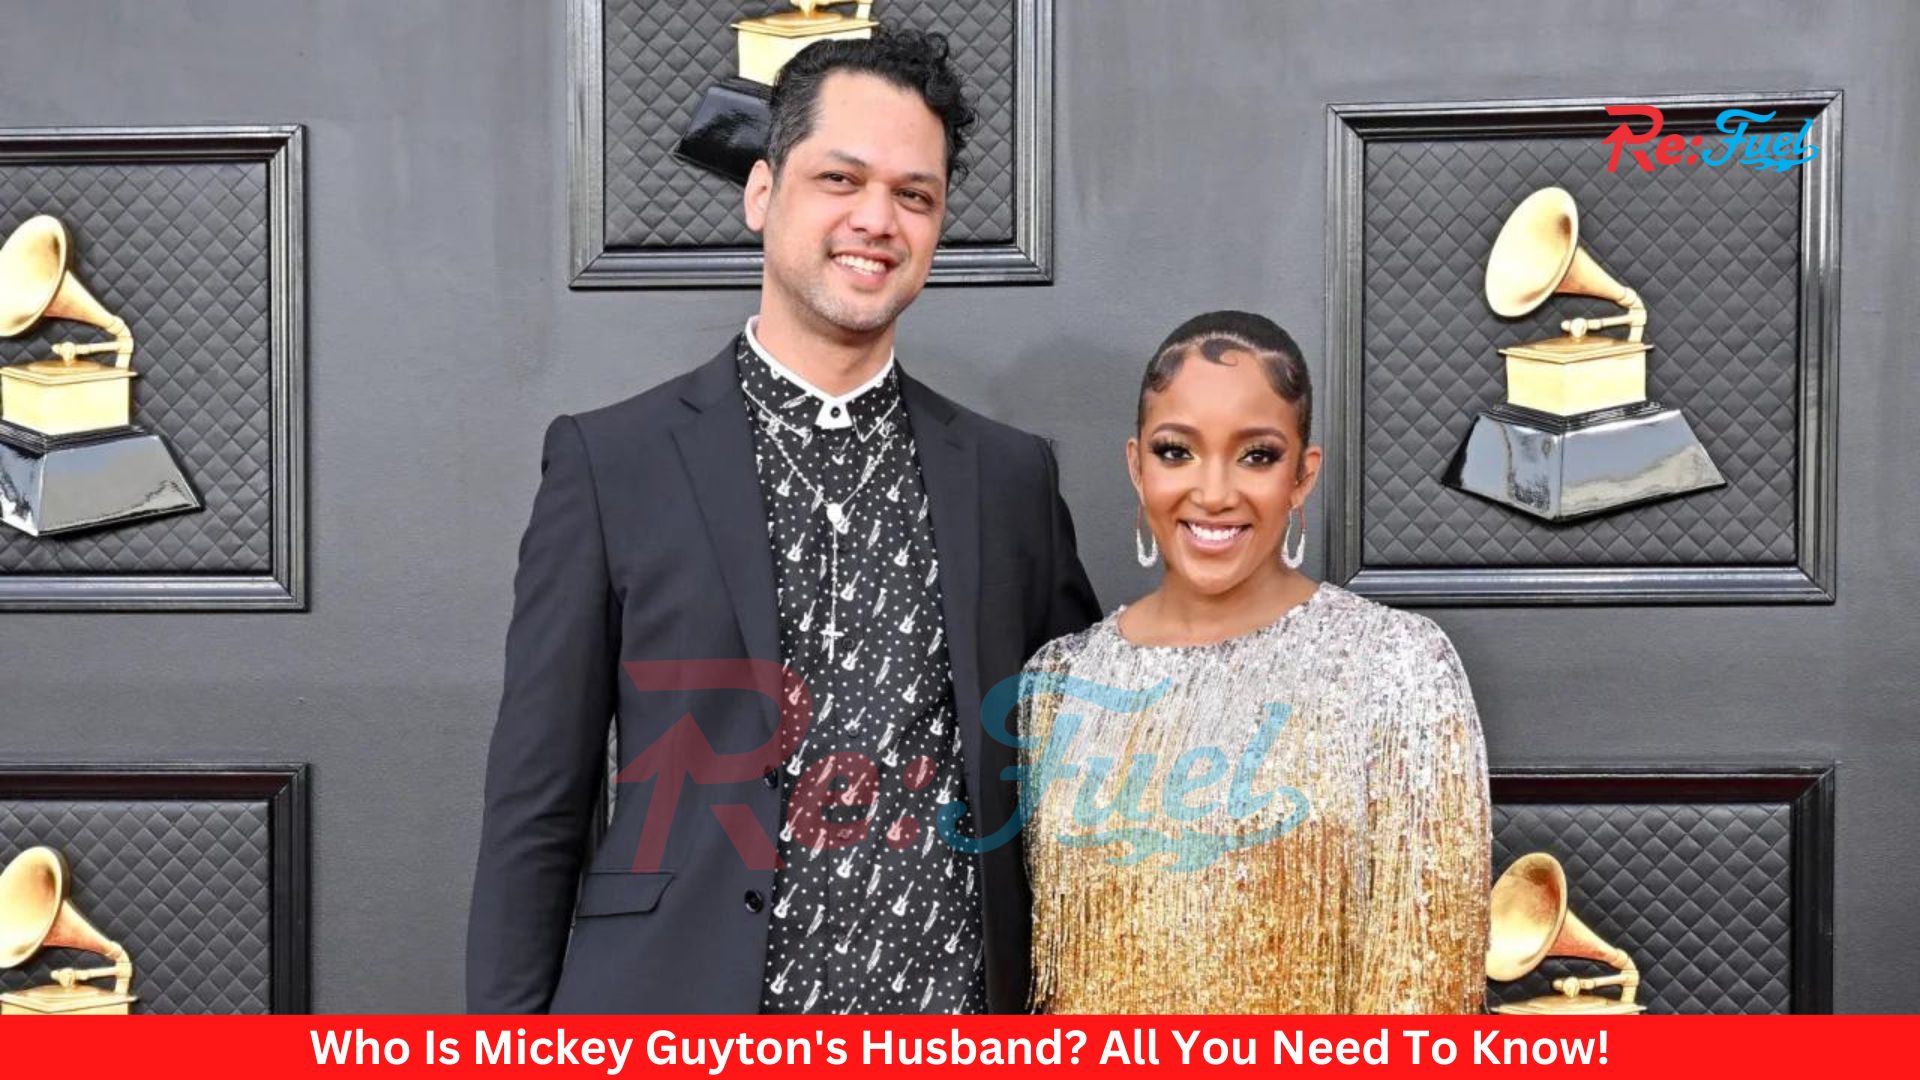 Who Is Mickey Guyton's Husband? All You Need To Know!